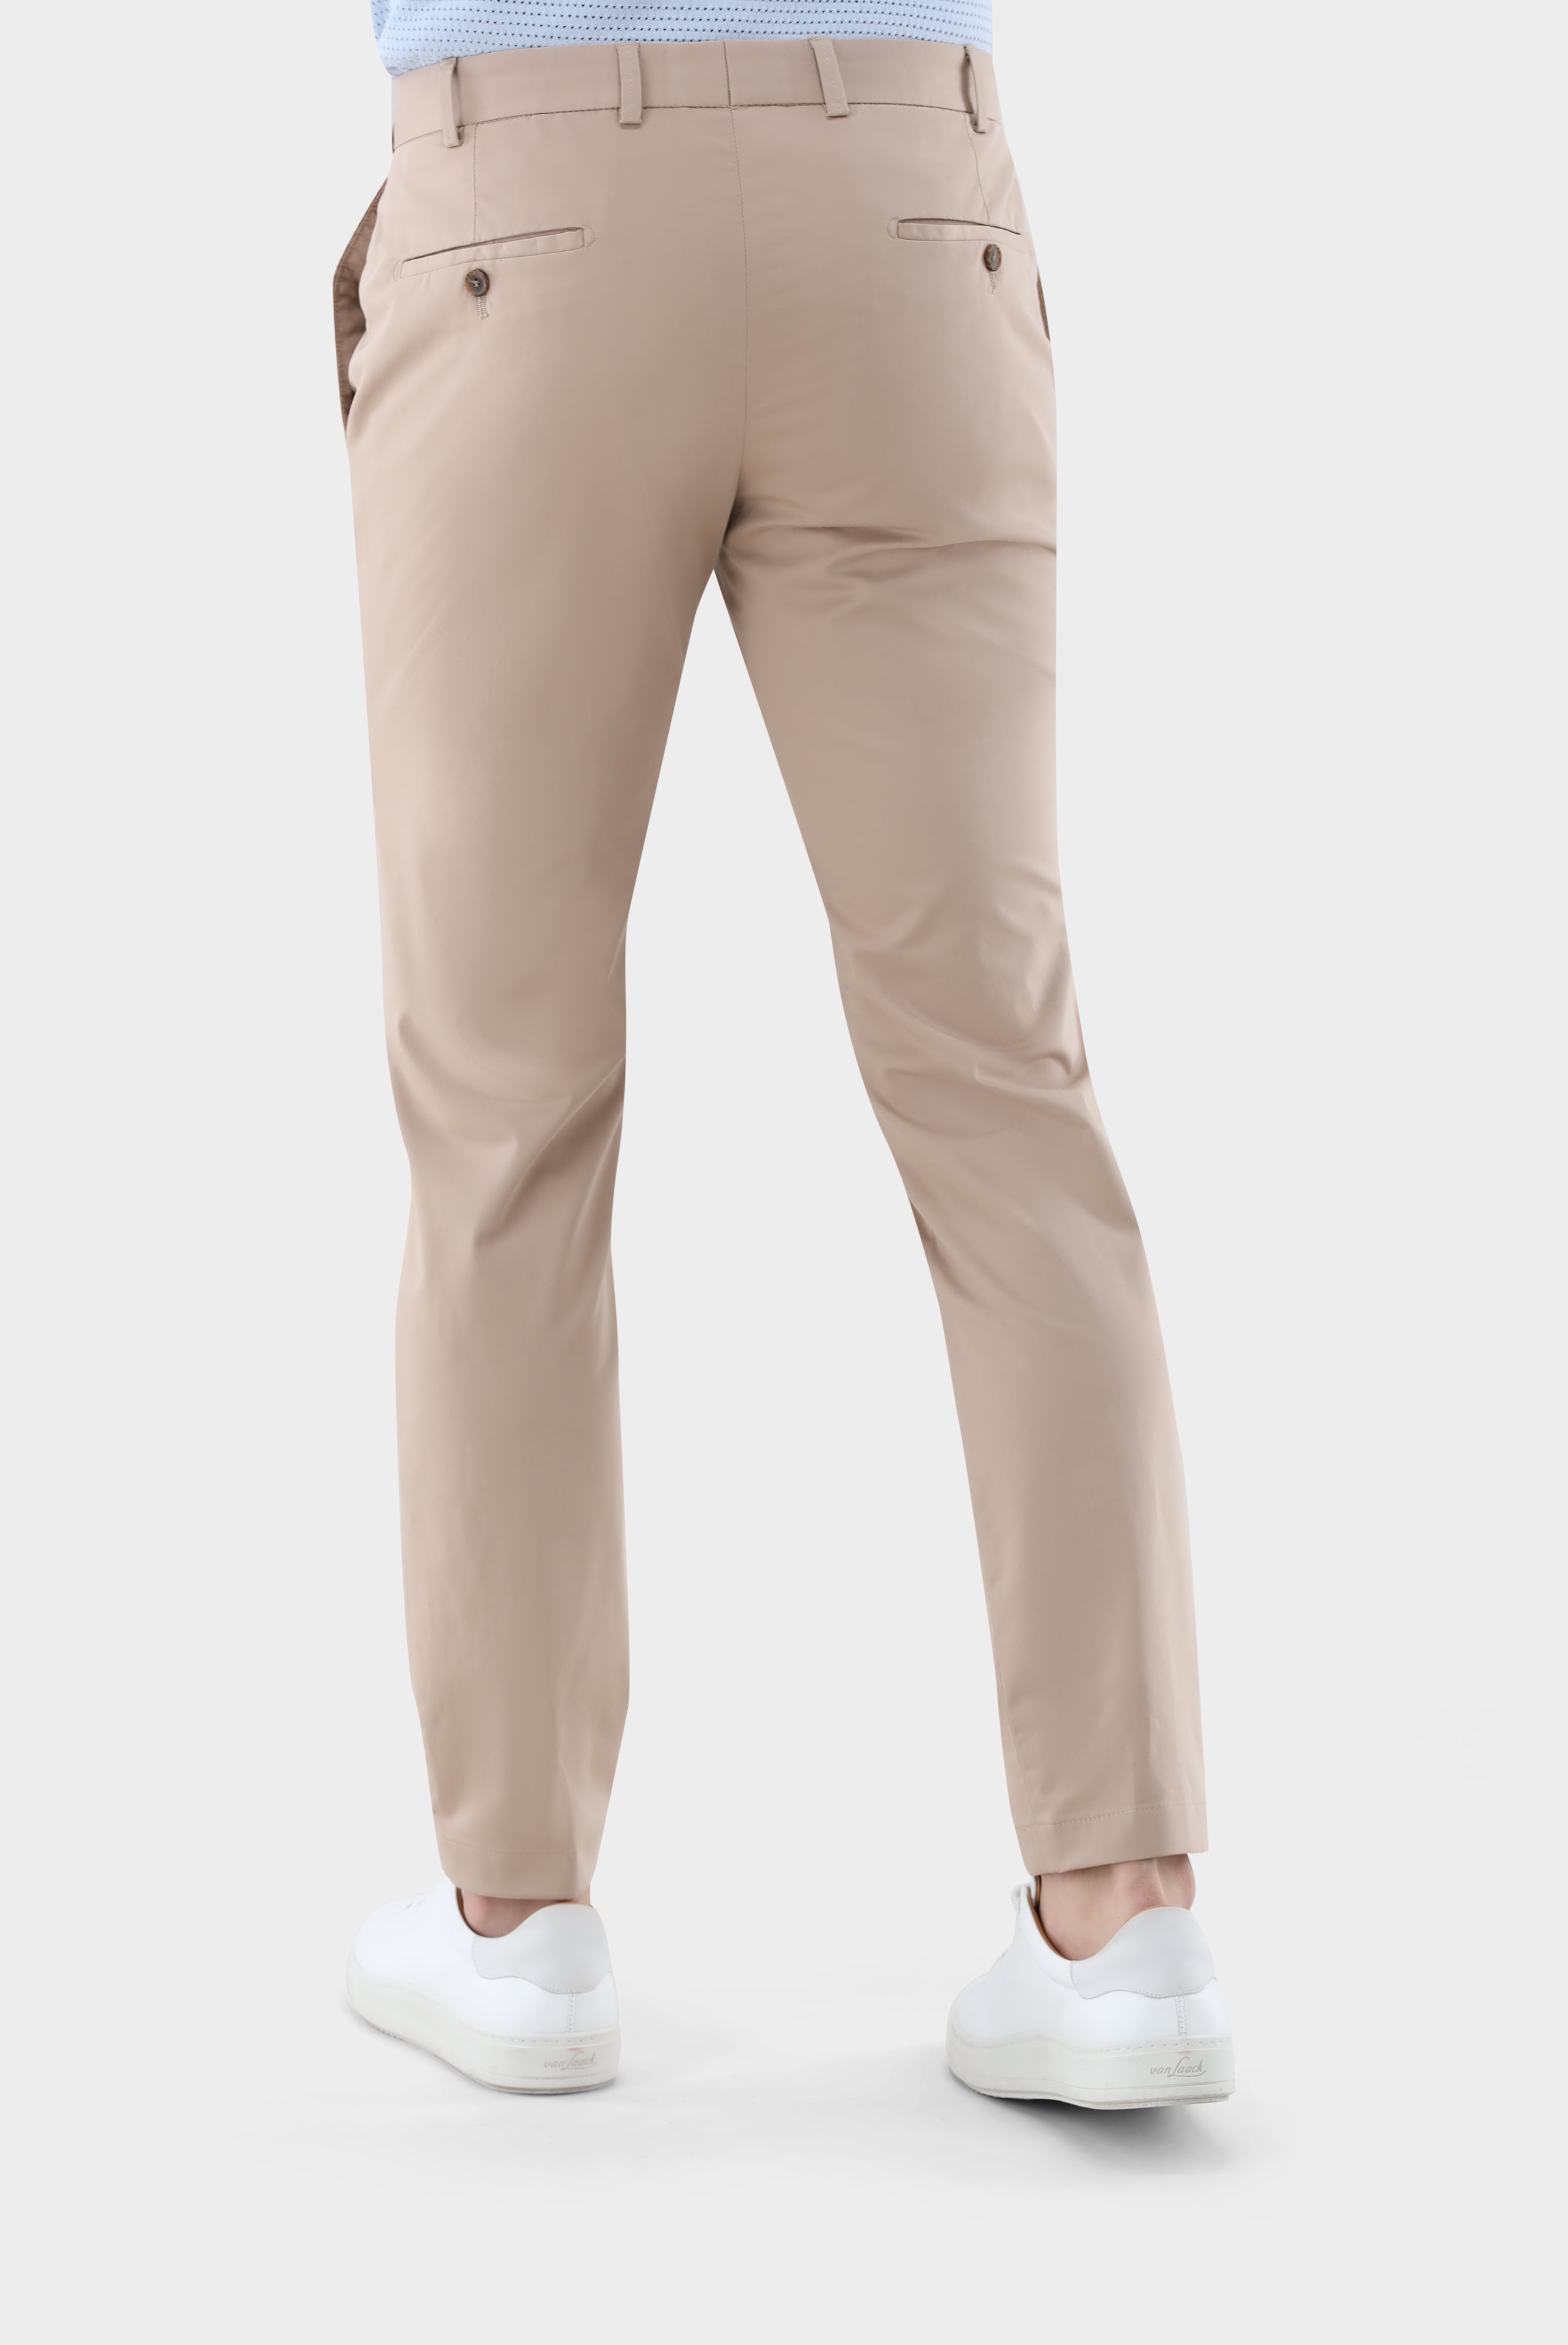 Jeans & Trousers+Stretch Chino Trousers+80.7858..J00151.140.54